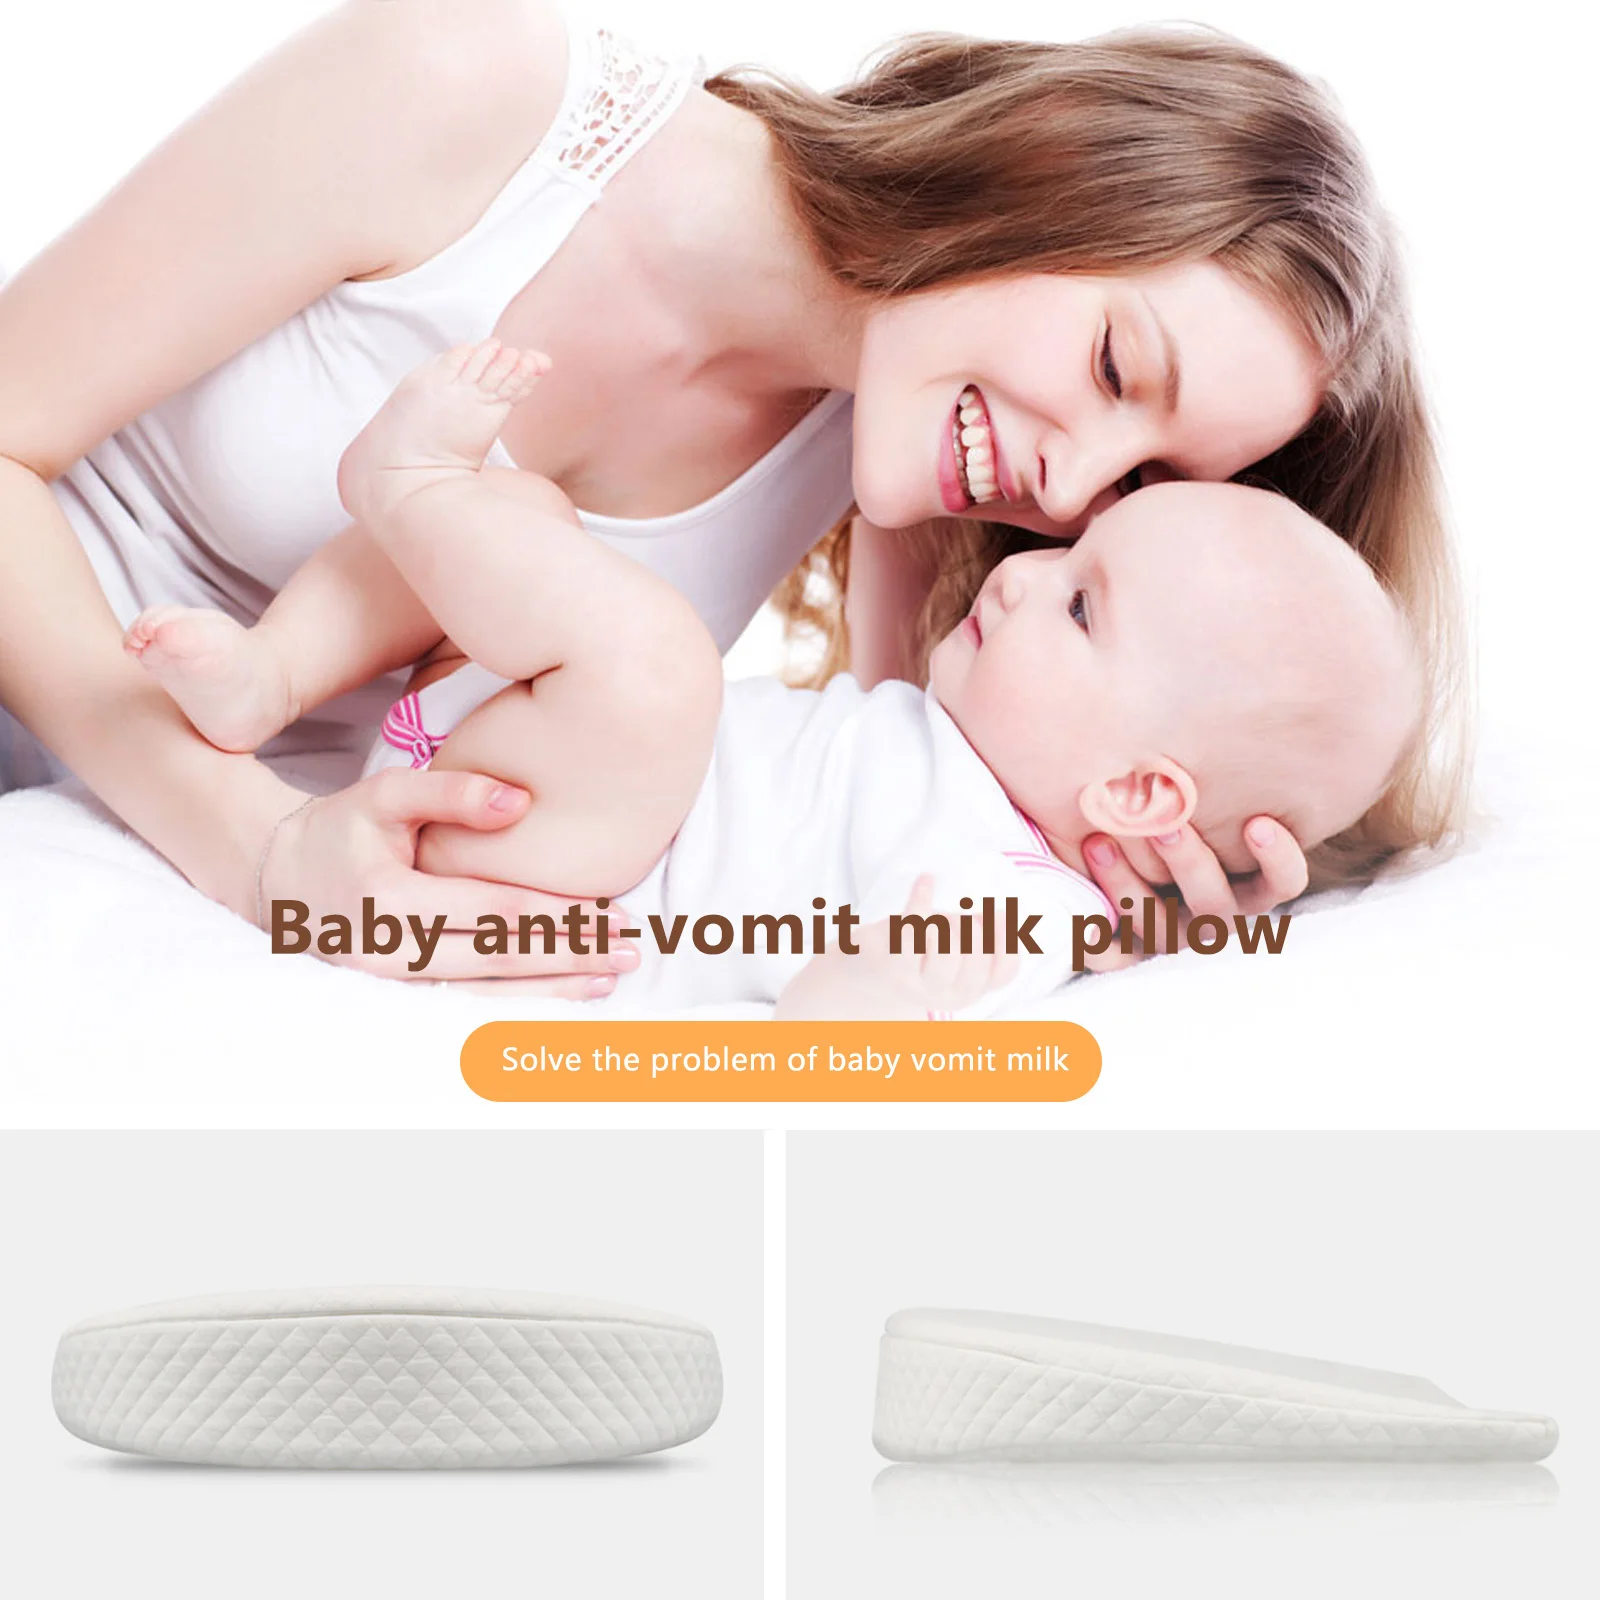 Universal Bassinet Wedge Incline Pillow for Better Baby Sleep by Baby Wishes Acid Reflux and Newborn Nasal Congestion Reducer Memory Foam Premium Breathable Cover Grip Bag and Ebook Bonus 